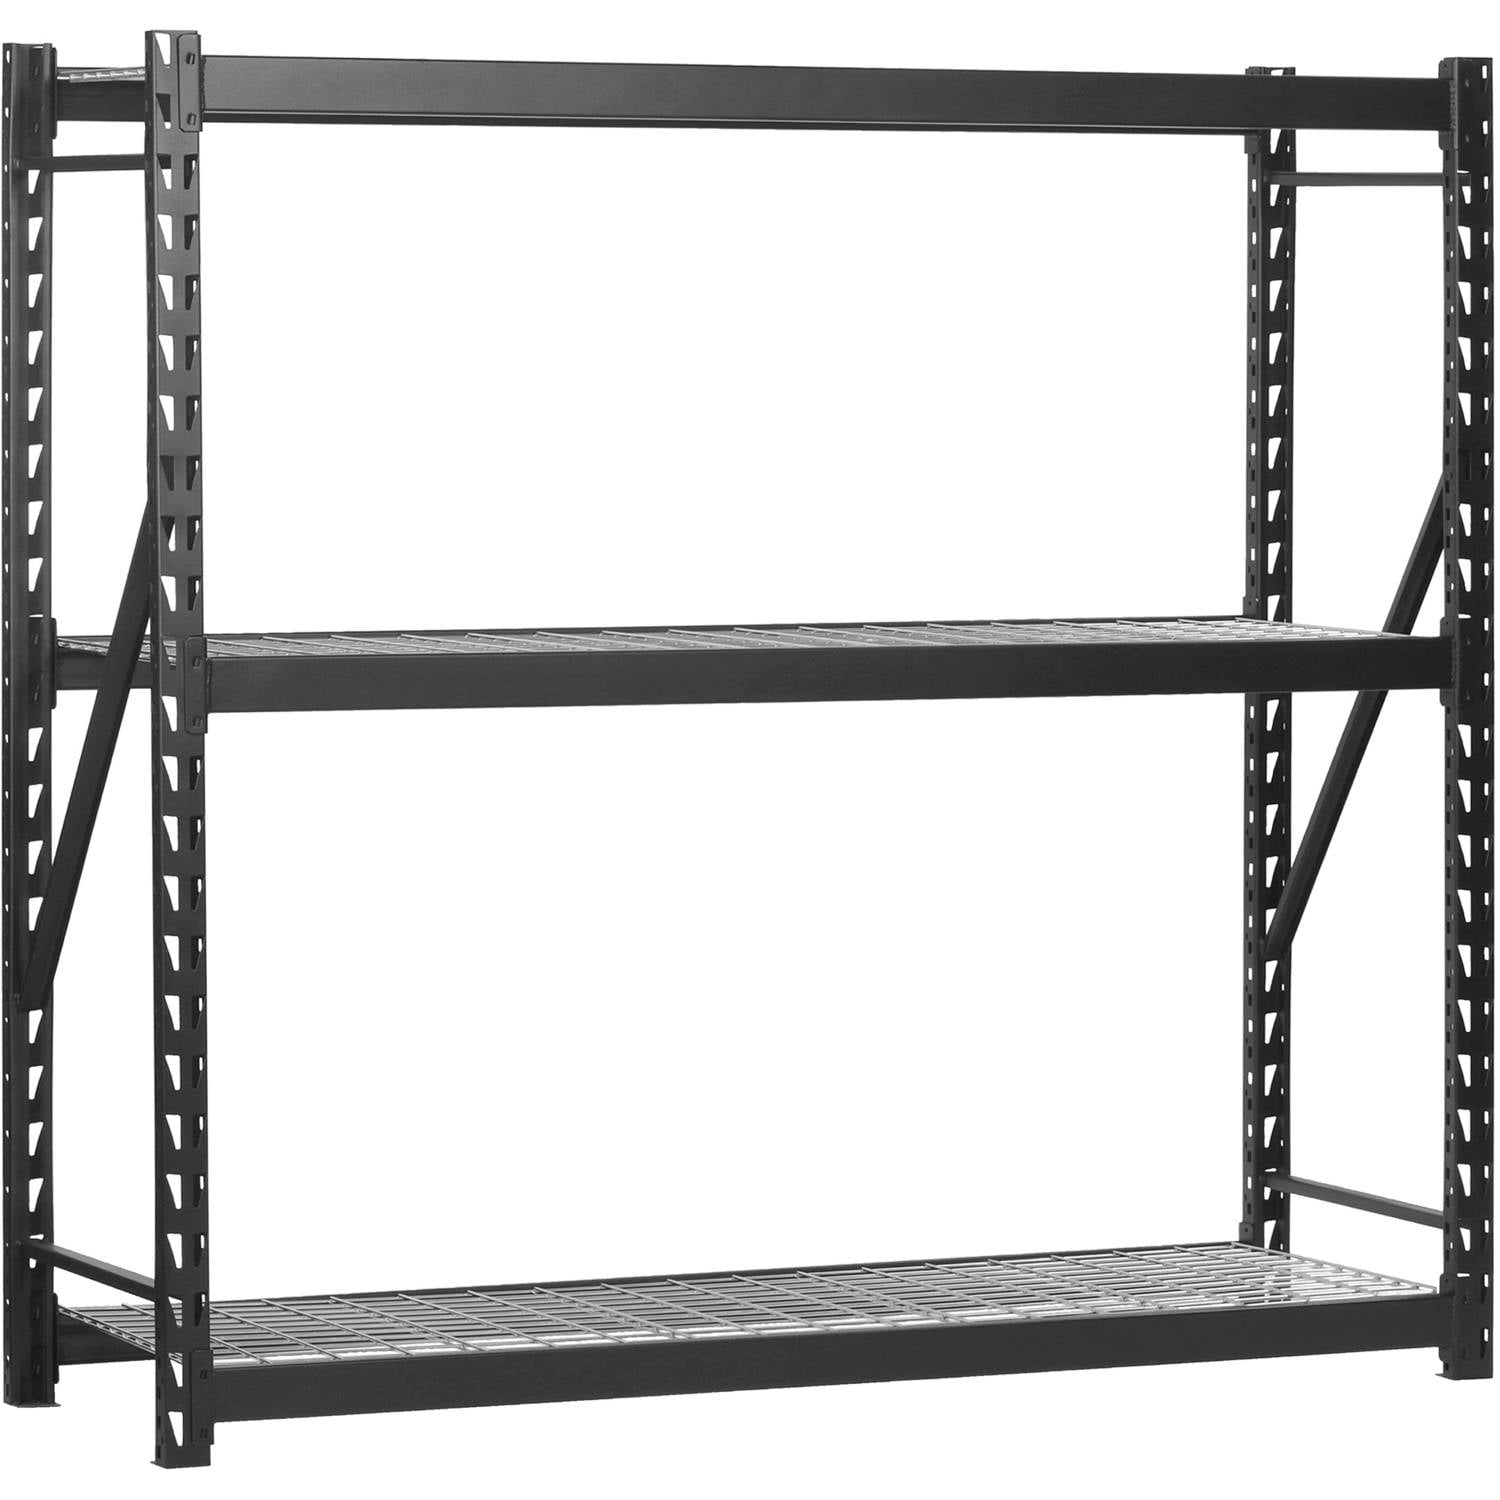 Muscle Rack 3 Tier Black 77 W X 24 D, Industrial Shelving With Drawers